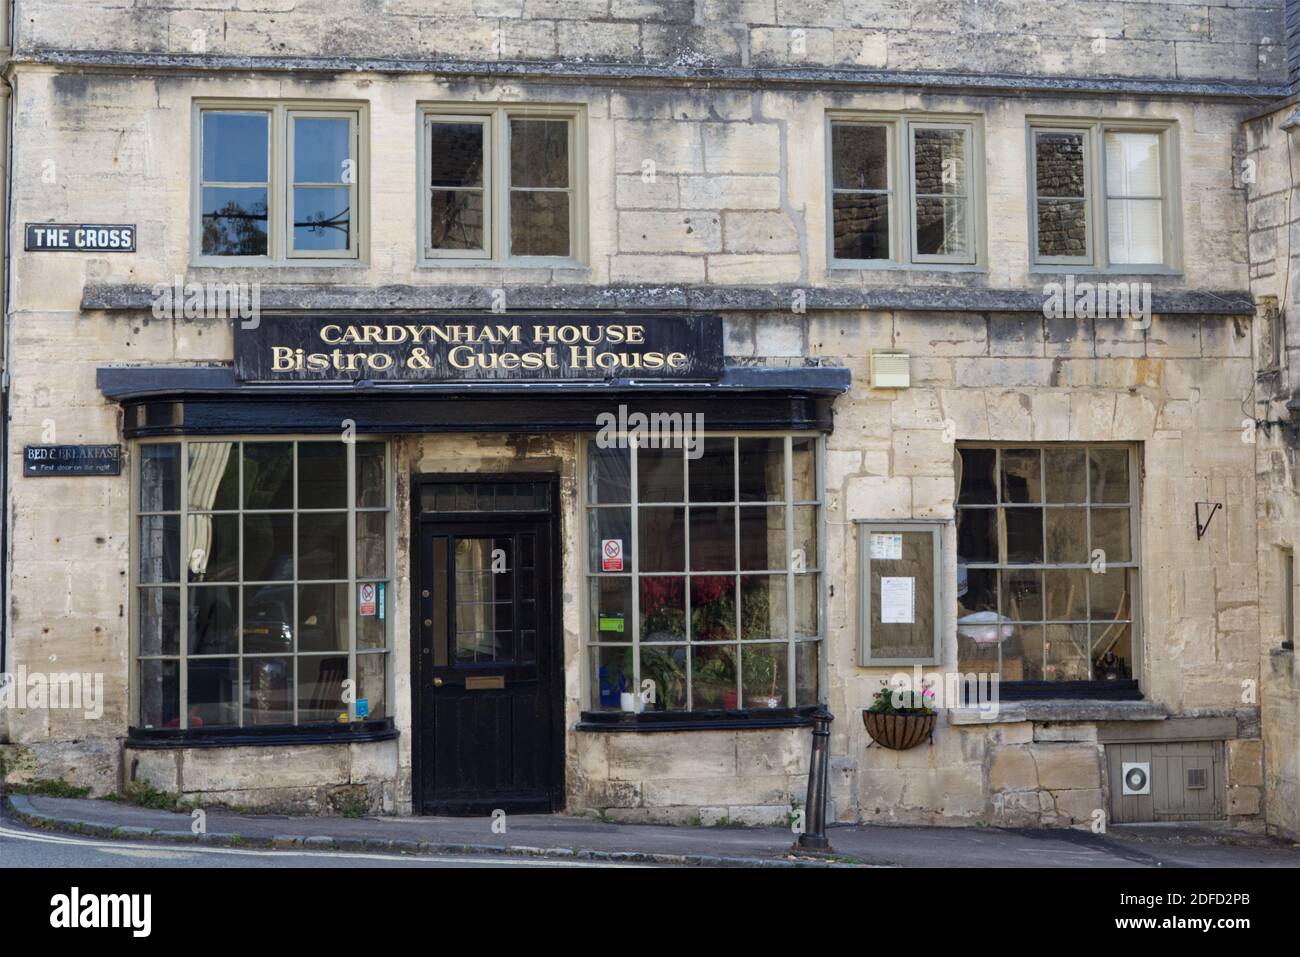 The cardynham house, bistro and guest house, painswick Stock Photo